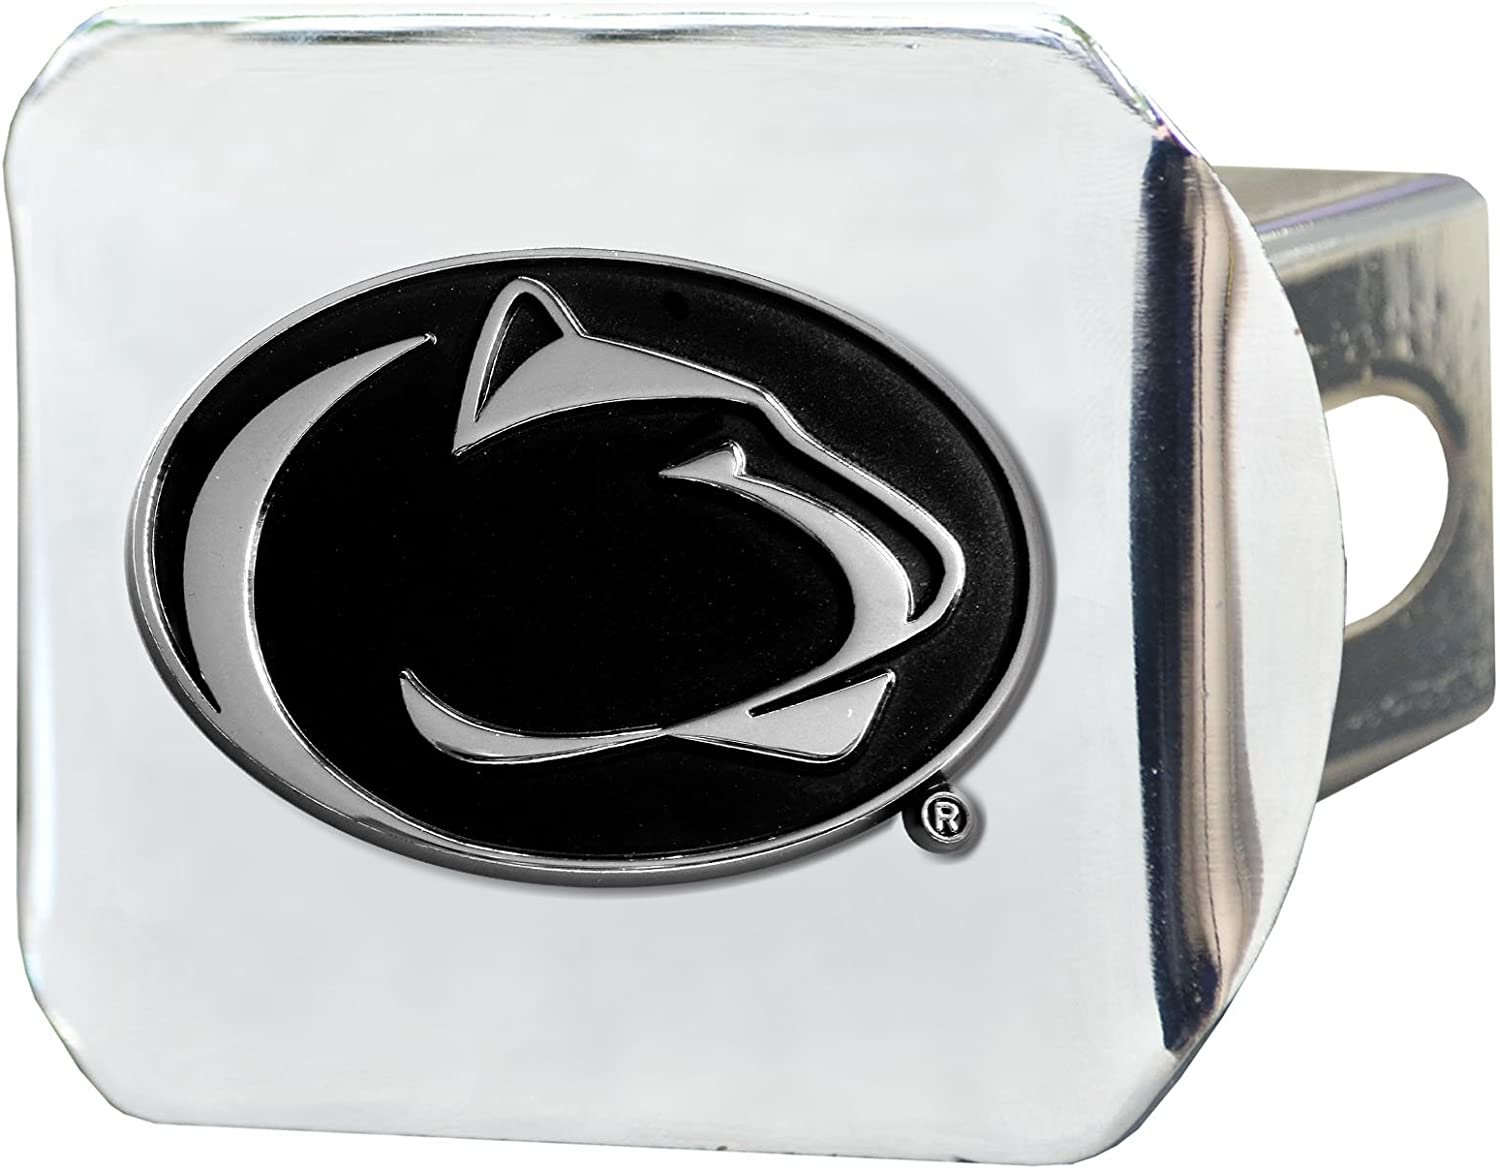 Penn State Nittany Lions Hitch Cover Solid Metal with Raised Chrome Metal Emblem 2" Square Type III University